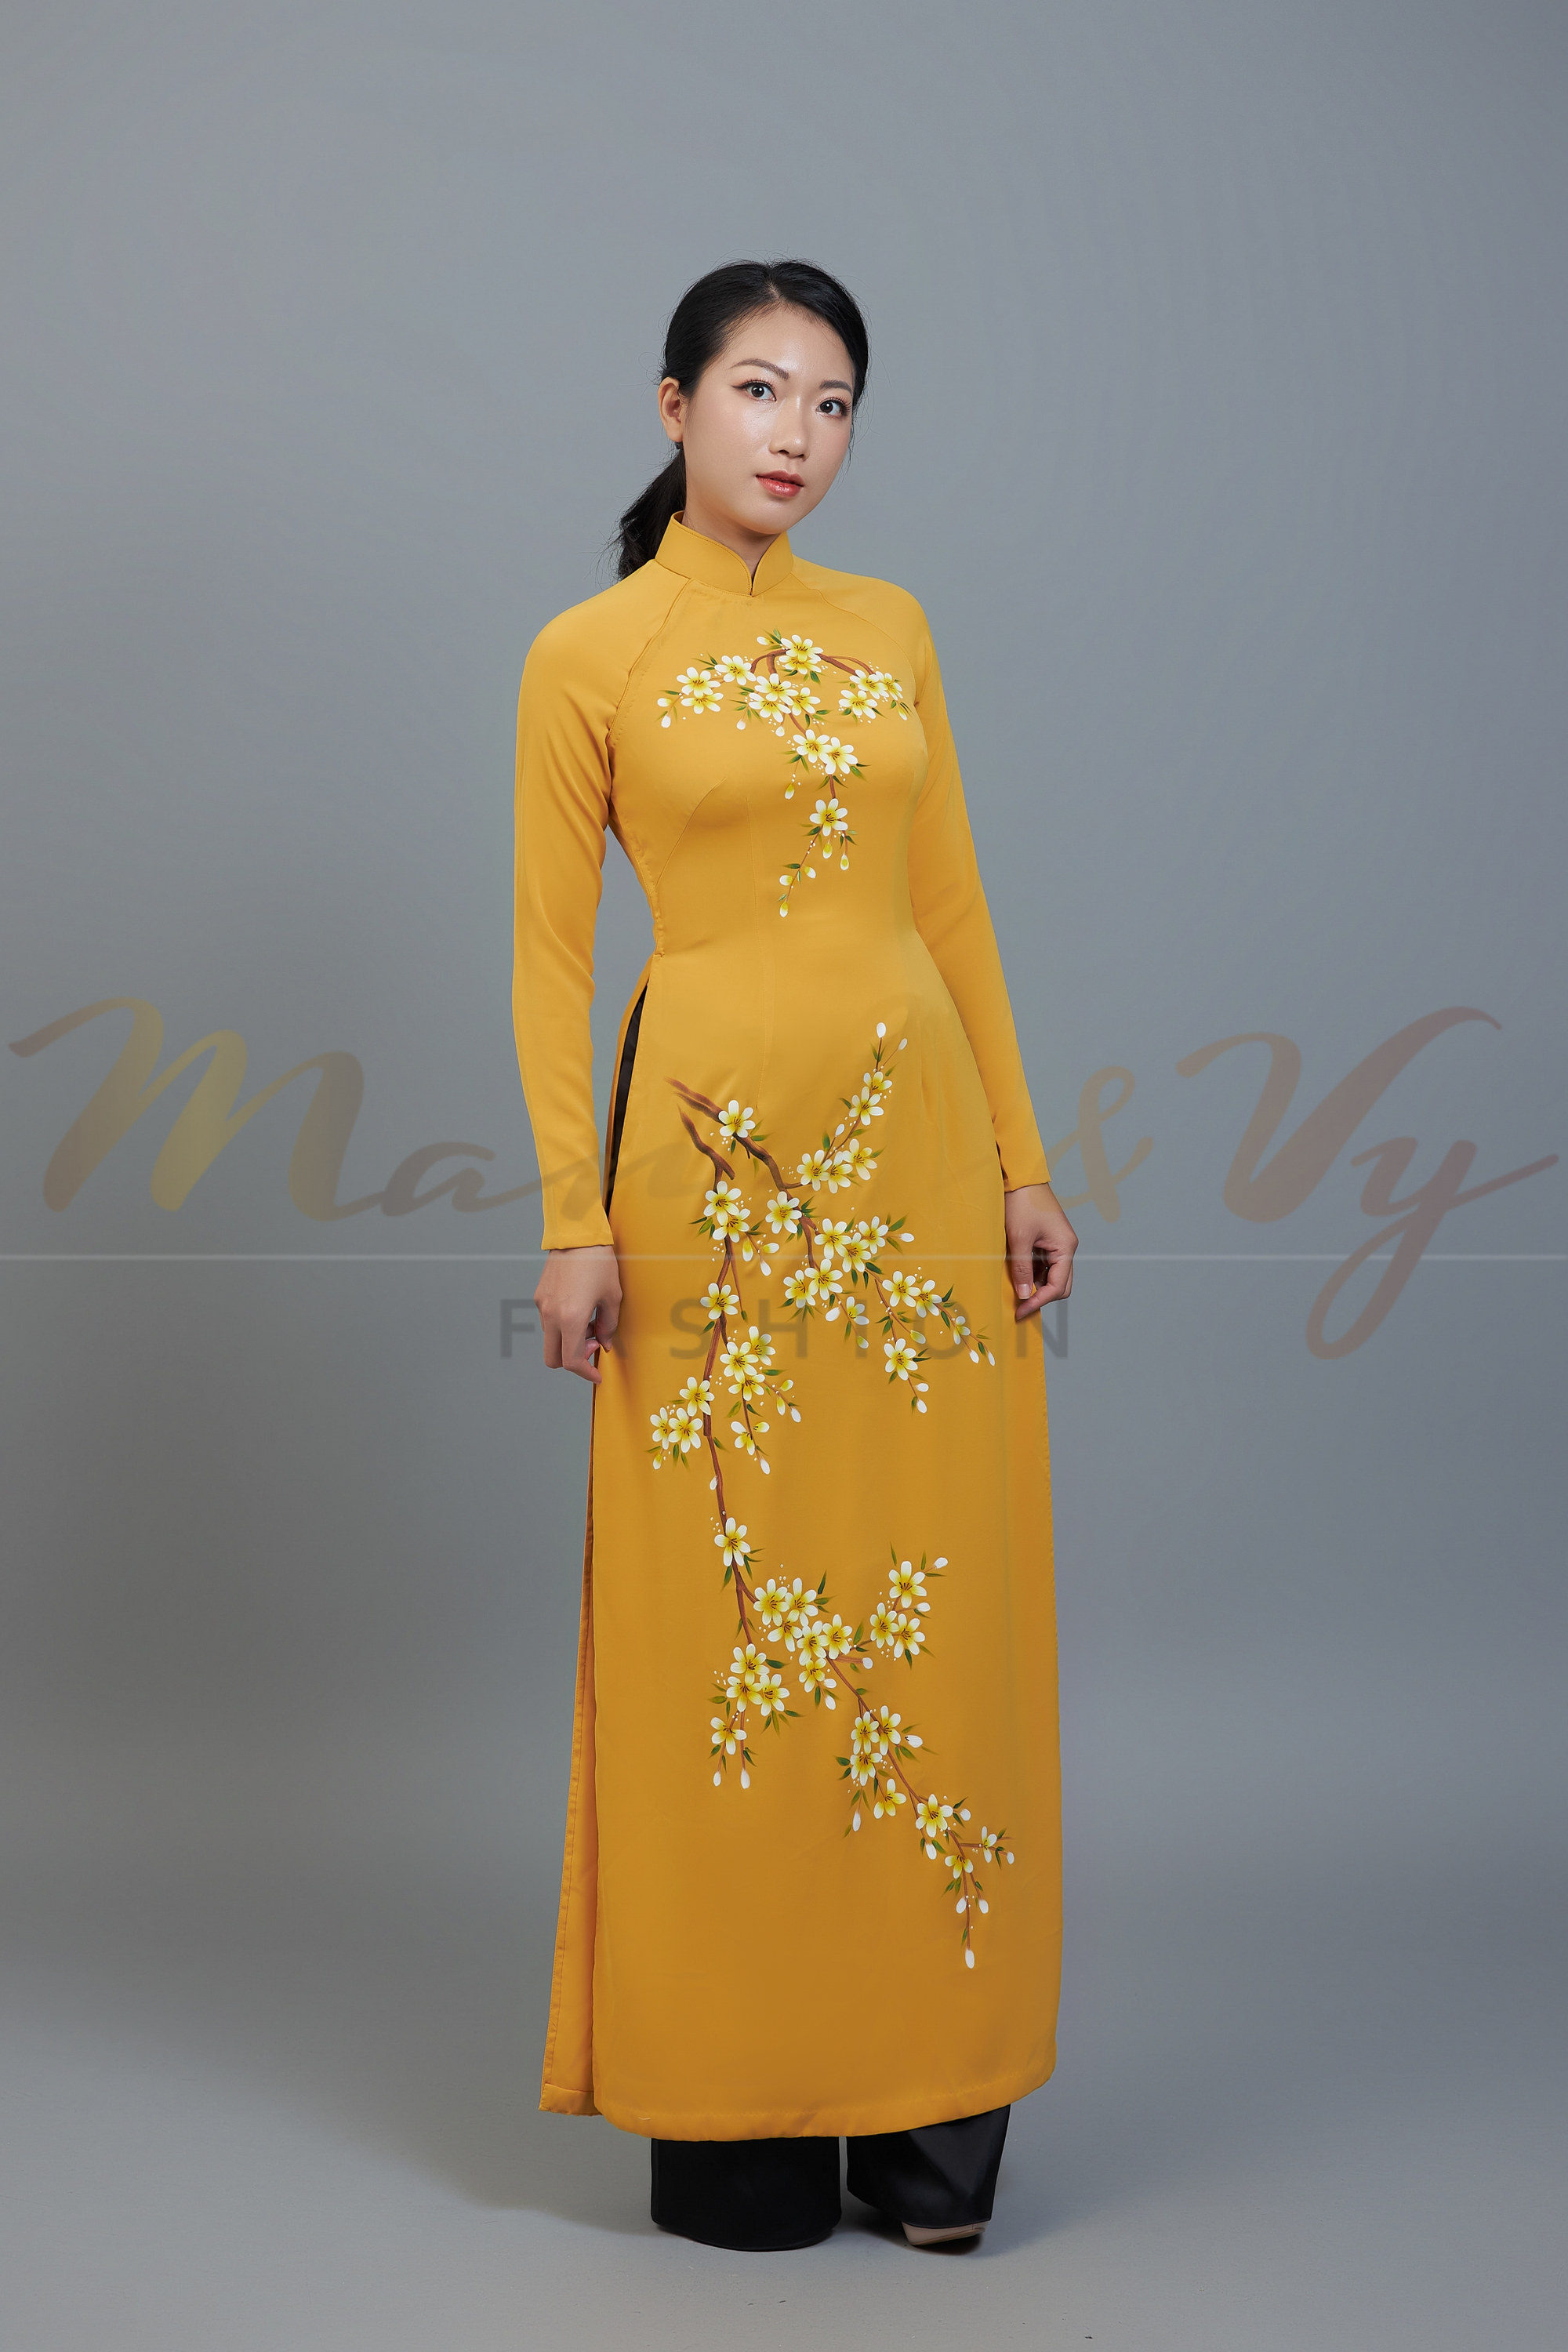 Custom made ao dai. Unique, hand-painted, floral motif on dark yellow fabric.